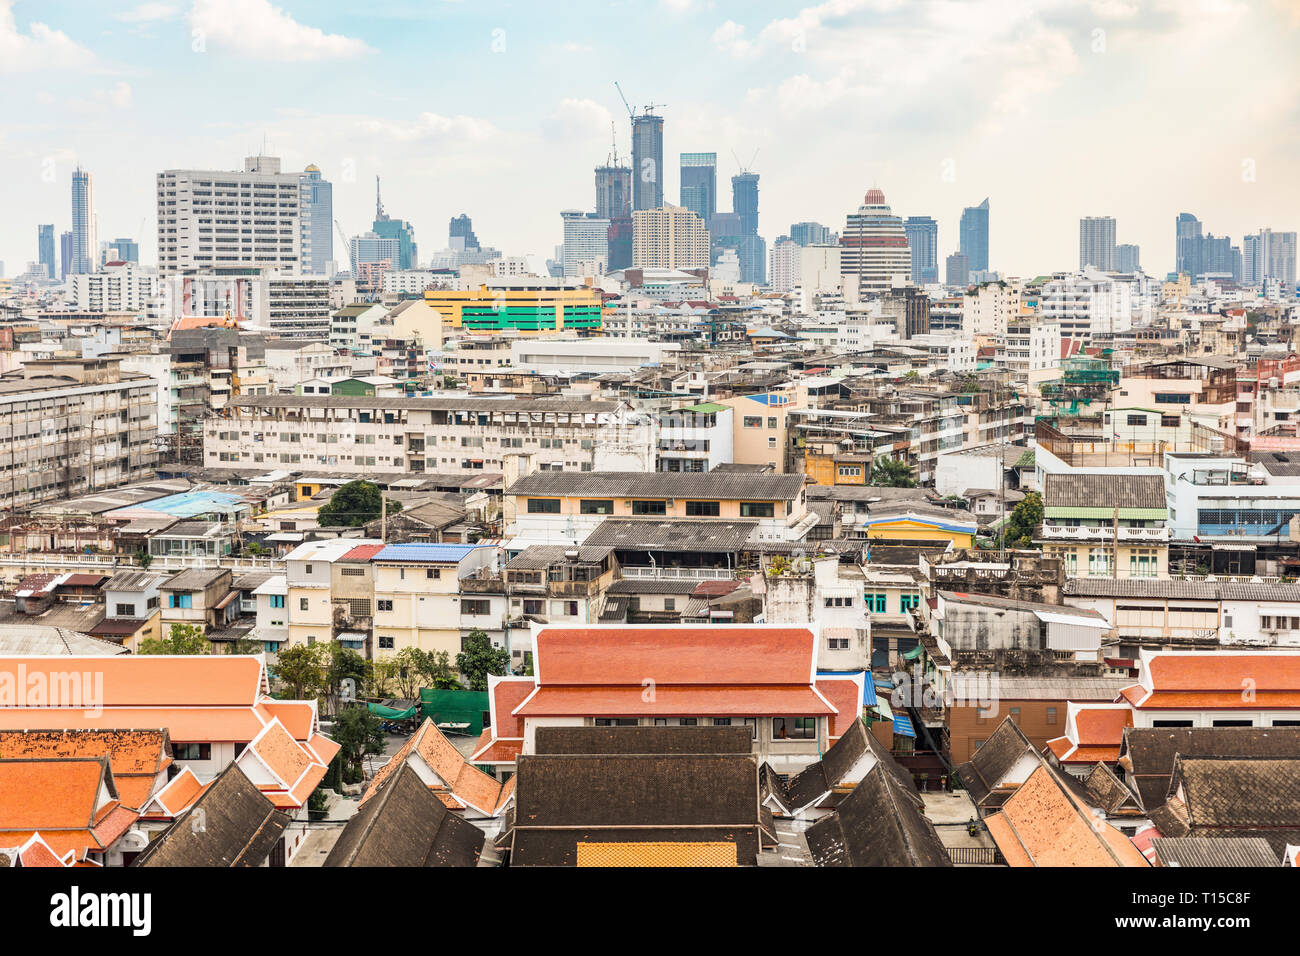 Thailand, Bangkok, aerial view of the city with different areas Stock Photo